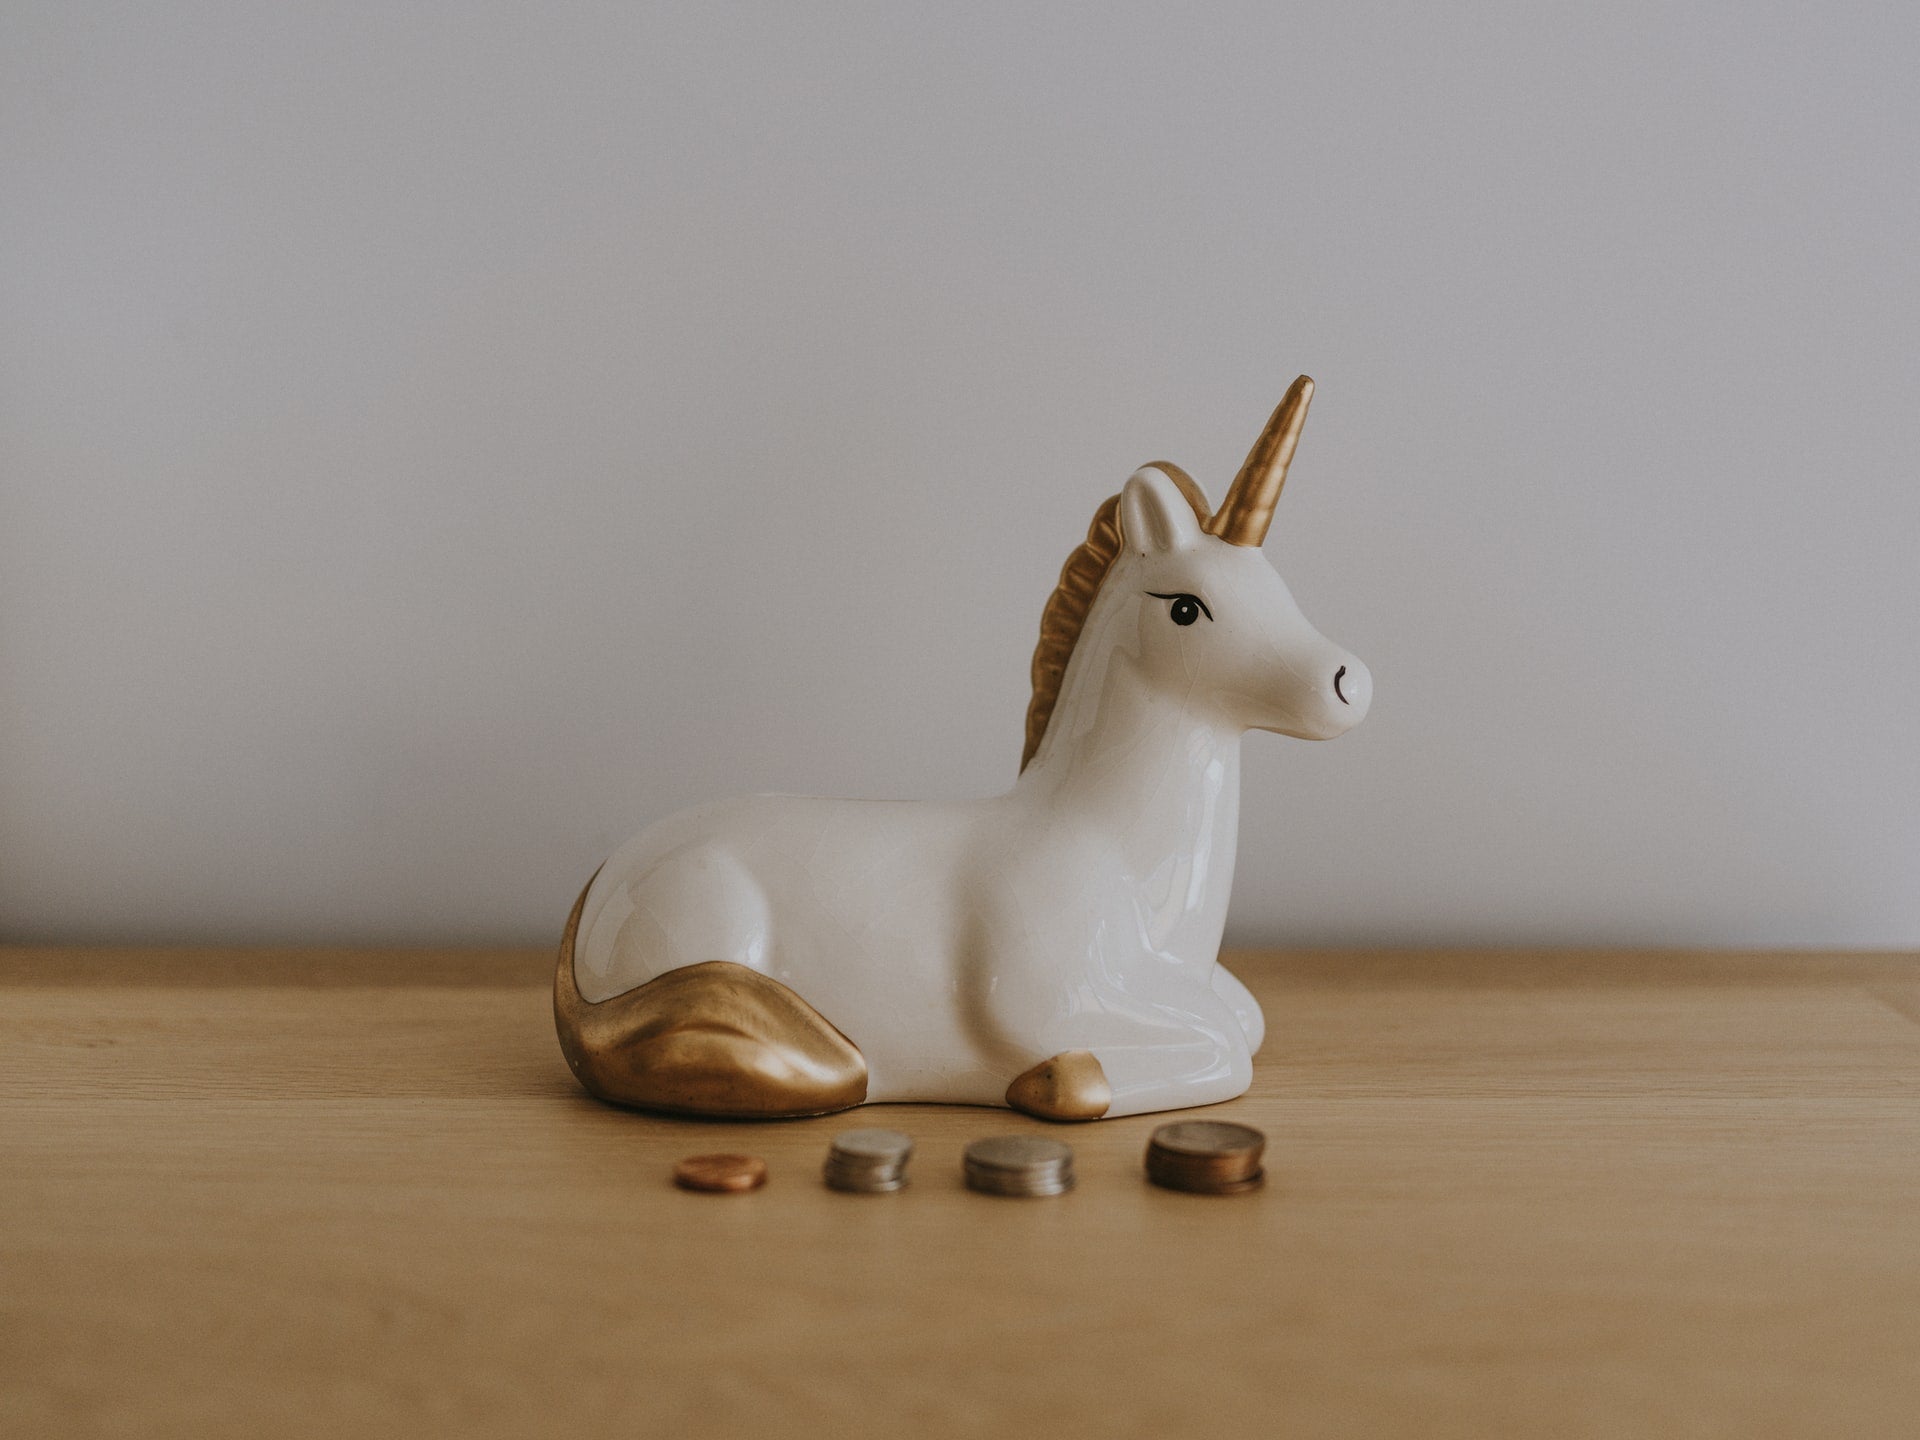 Japanese payments processor Opn secures unicorn status after $120m funding